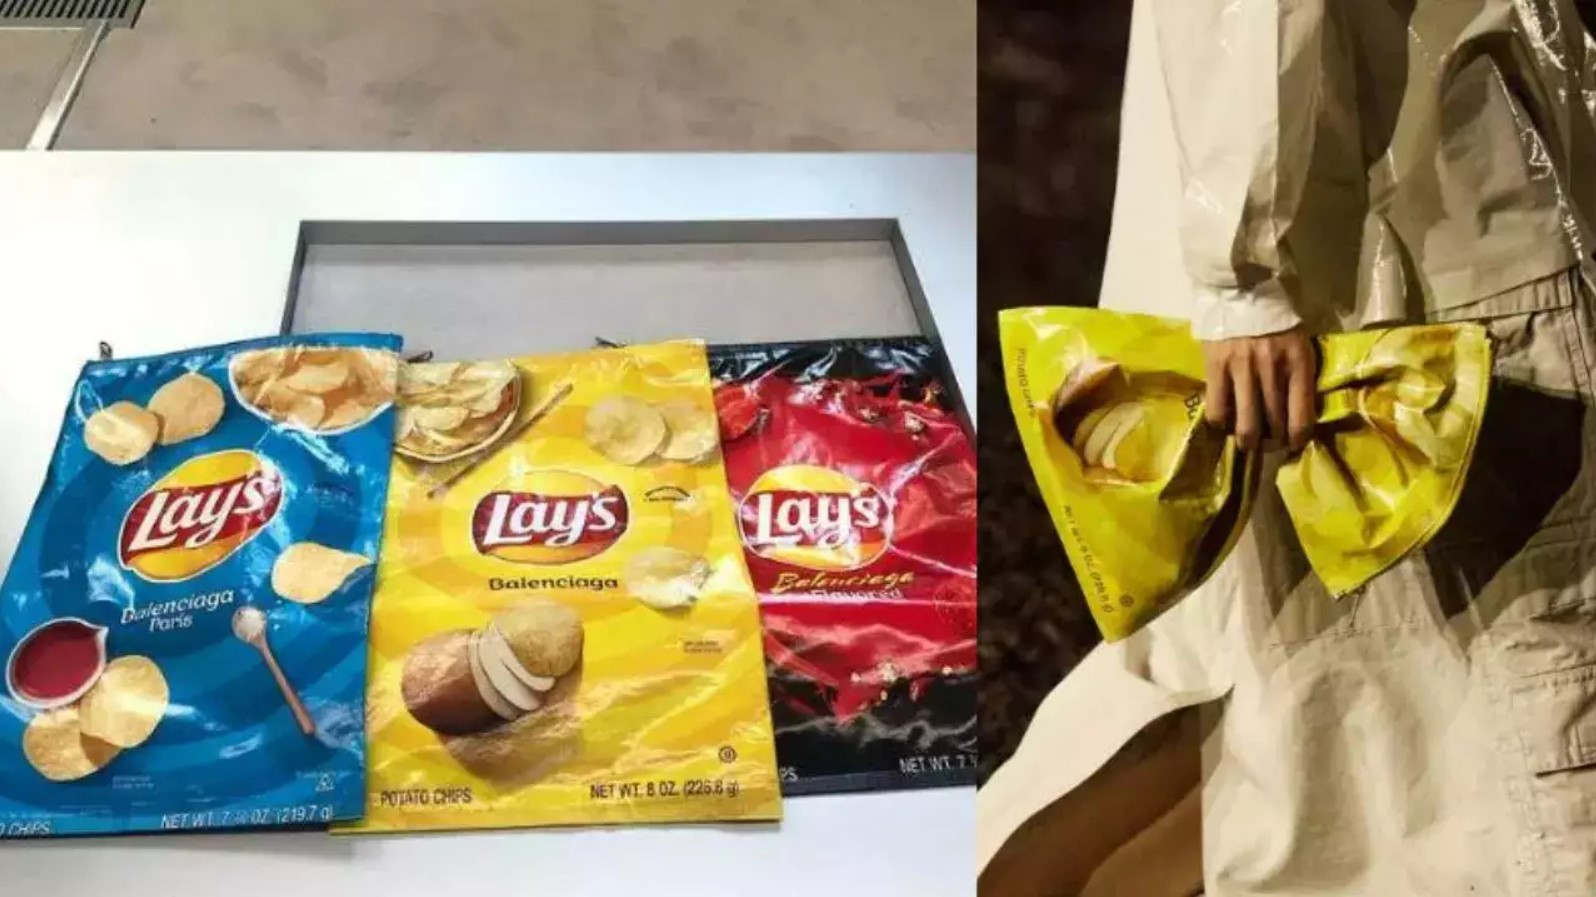 Balenciaga's new $1,800 bag is nothing but a pricey packet of Lay's potato  chips - Luxurylaunches